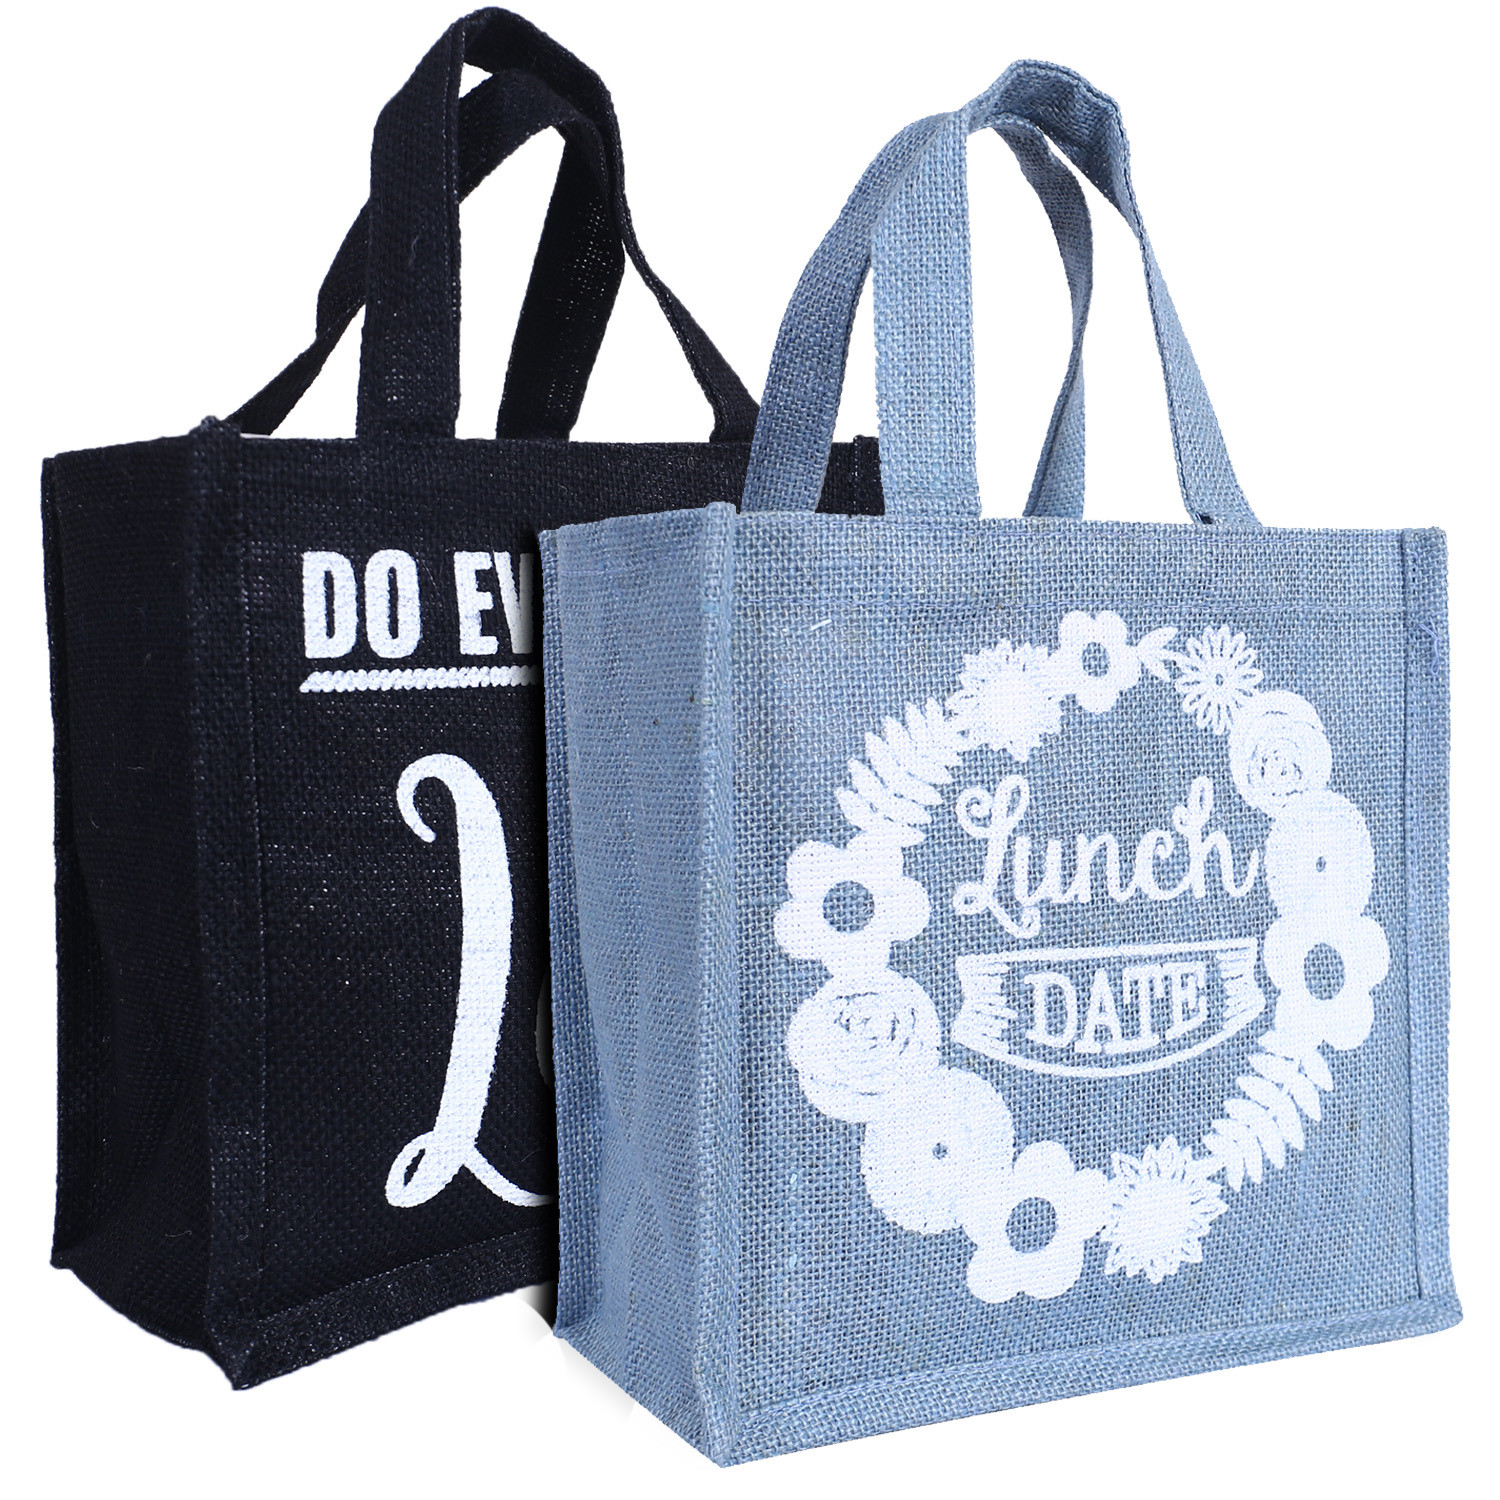 Kuber Industries Lunch Bag|Reusable Jute Fabric Tote Bag|Durable & Attractive Print Tiffin Carry Hand bag with Handle For office,School,Gift,Pack of 2 (Gray & Black)